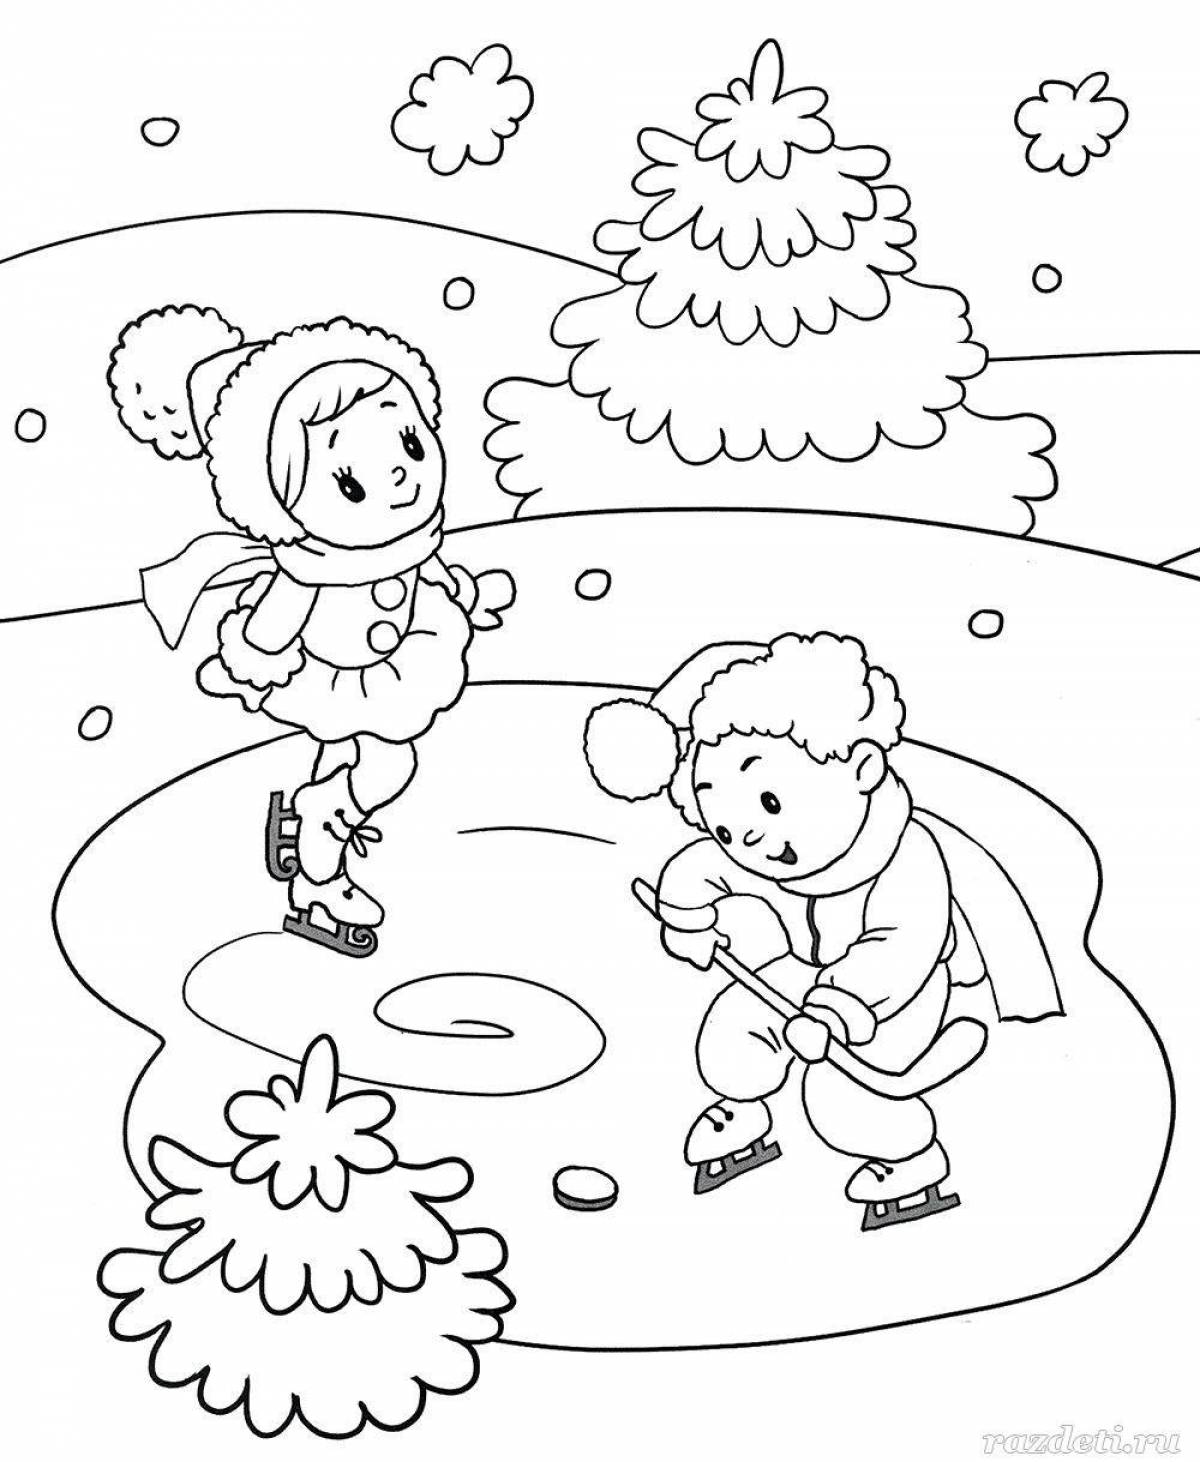 Great coloring book for kids winter fun 5-6 years old